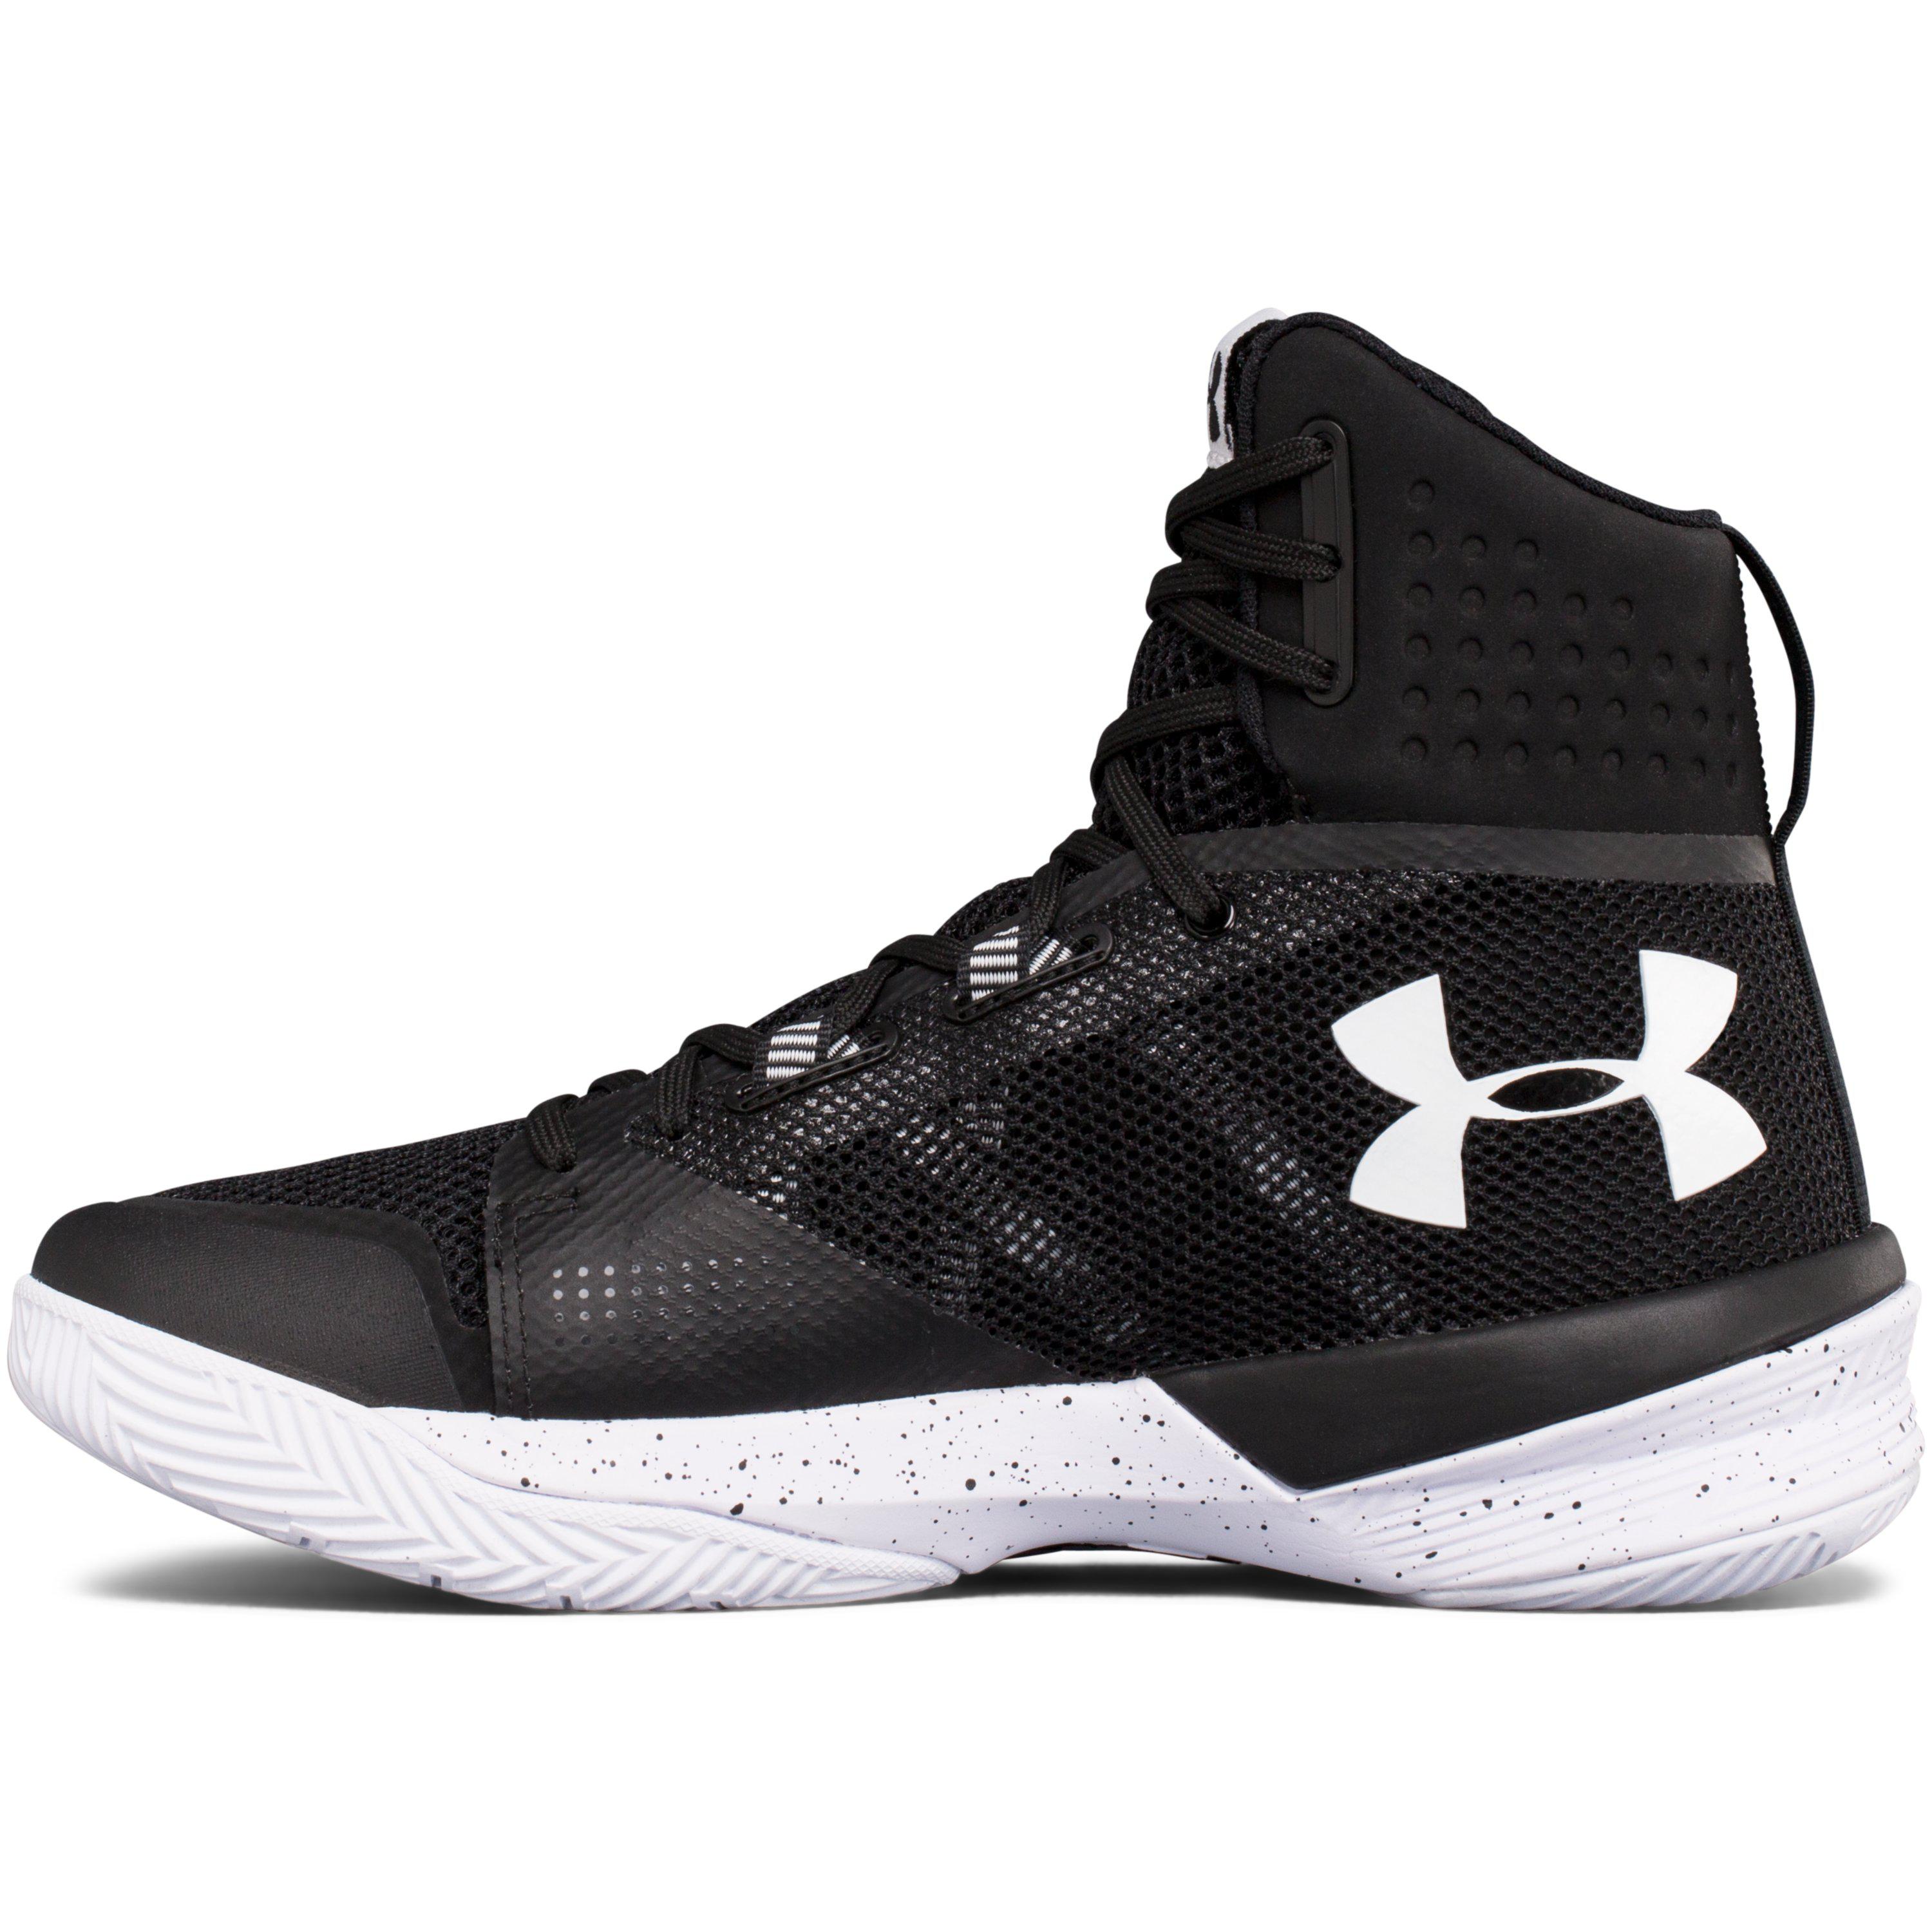 Under Armour Women's Ua Highlight Ace Volleyball Shoes in Black - Lyst